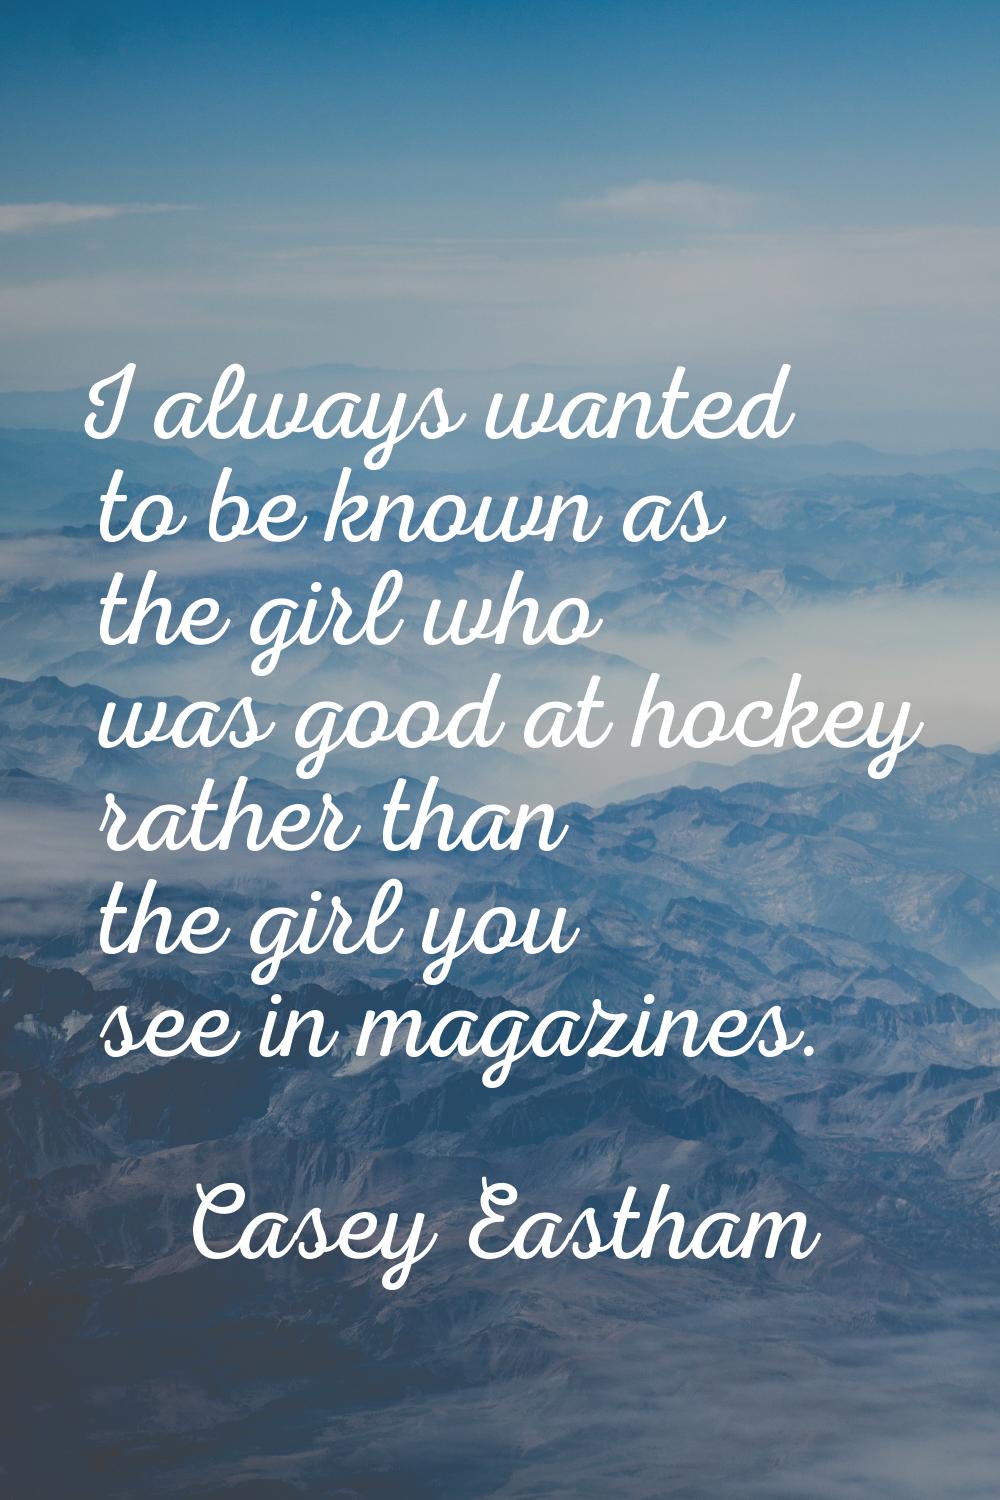 I always wanted to be known as the girl who was good at hockey rather than the girl you see in maga